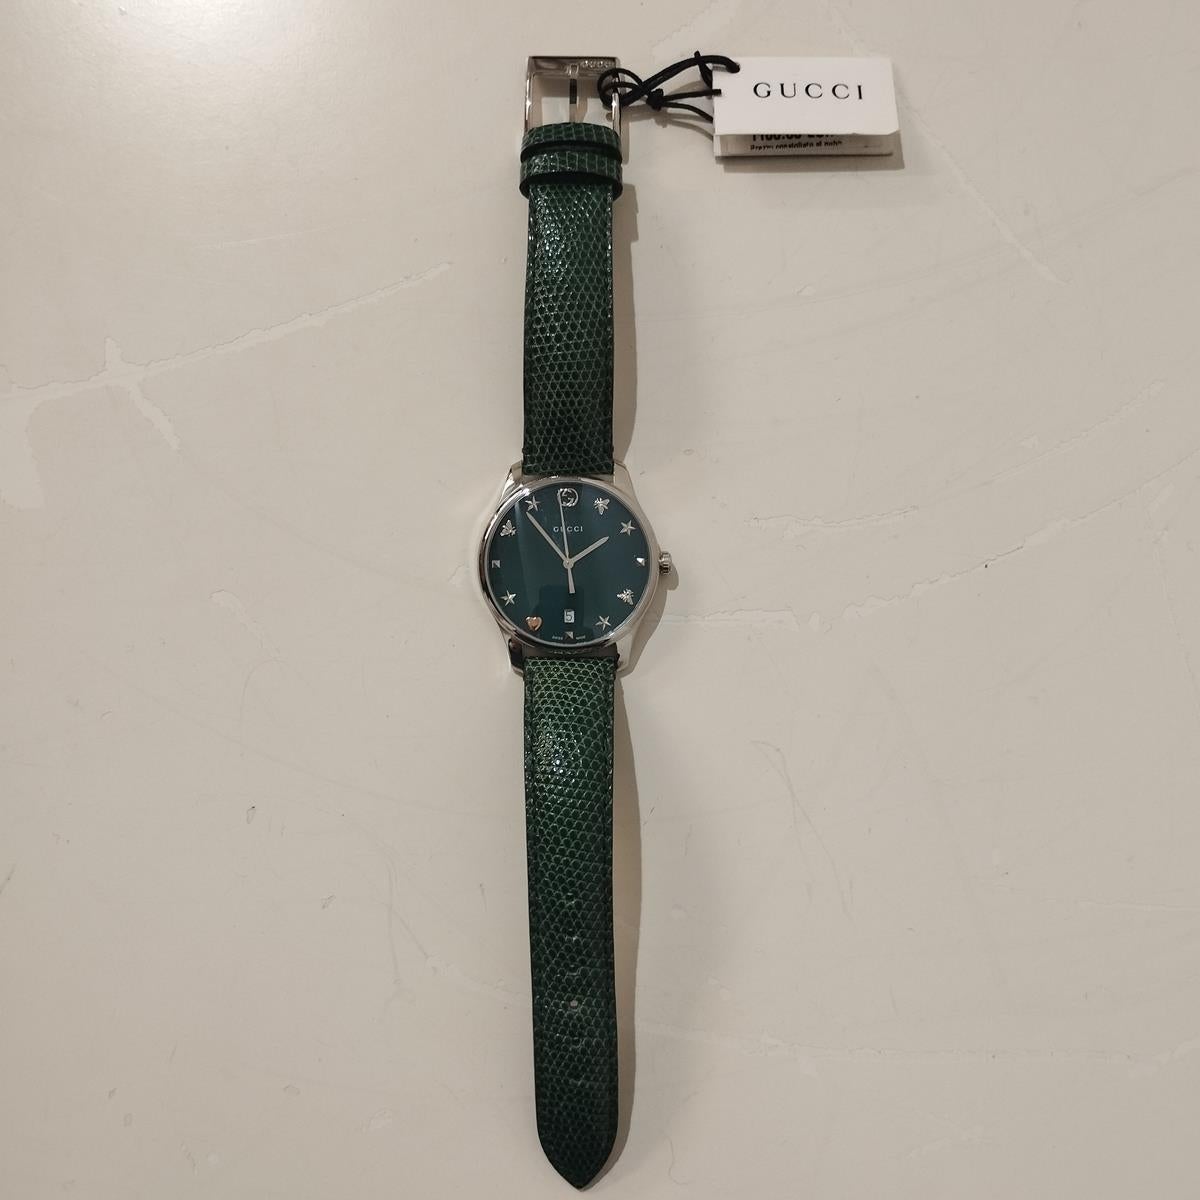 Beautiful and brand new Gucci watch
Timeless Watch
YA1264042
Steel 
Green mother of pearl dial
Glass
Quartz mechanism (brand new battery)
Water resistant
Case 36 mm
Green lizard printed leather bracelet 
With box
Original price € 1100
Worldwide